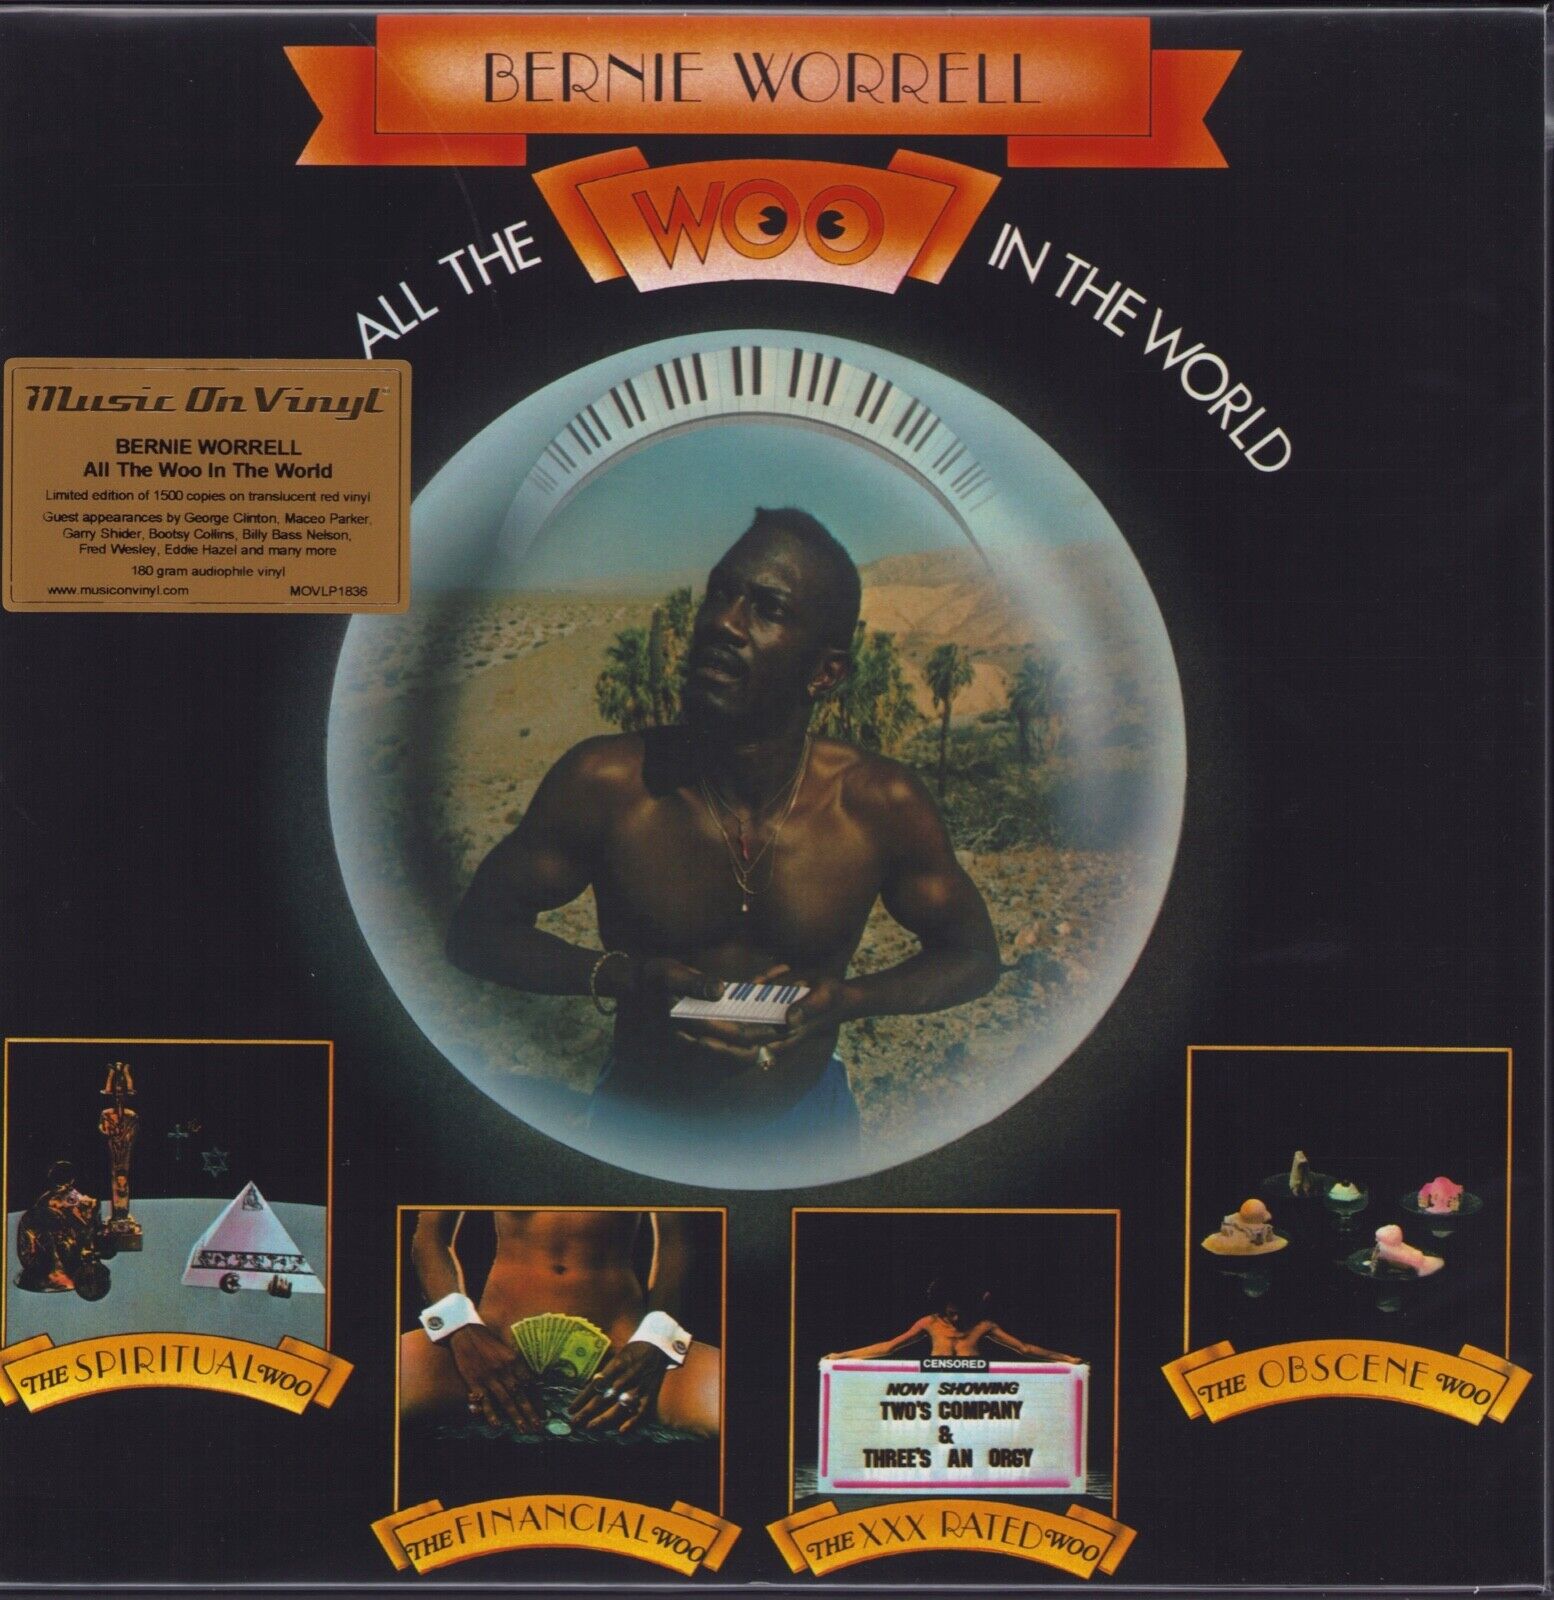 Bernie Worrell - All The Woo In The World Red Vinyl 2LP Limited Edition